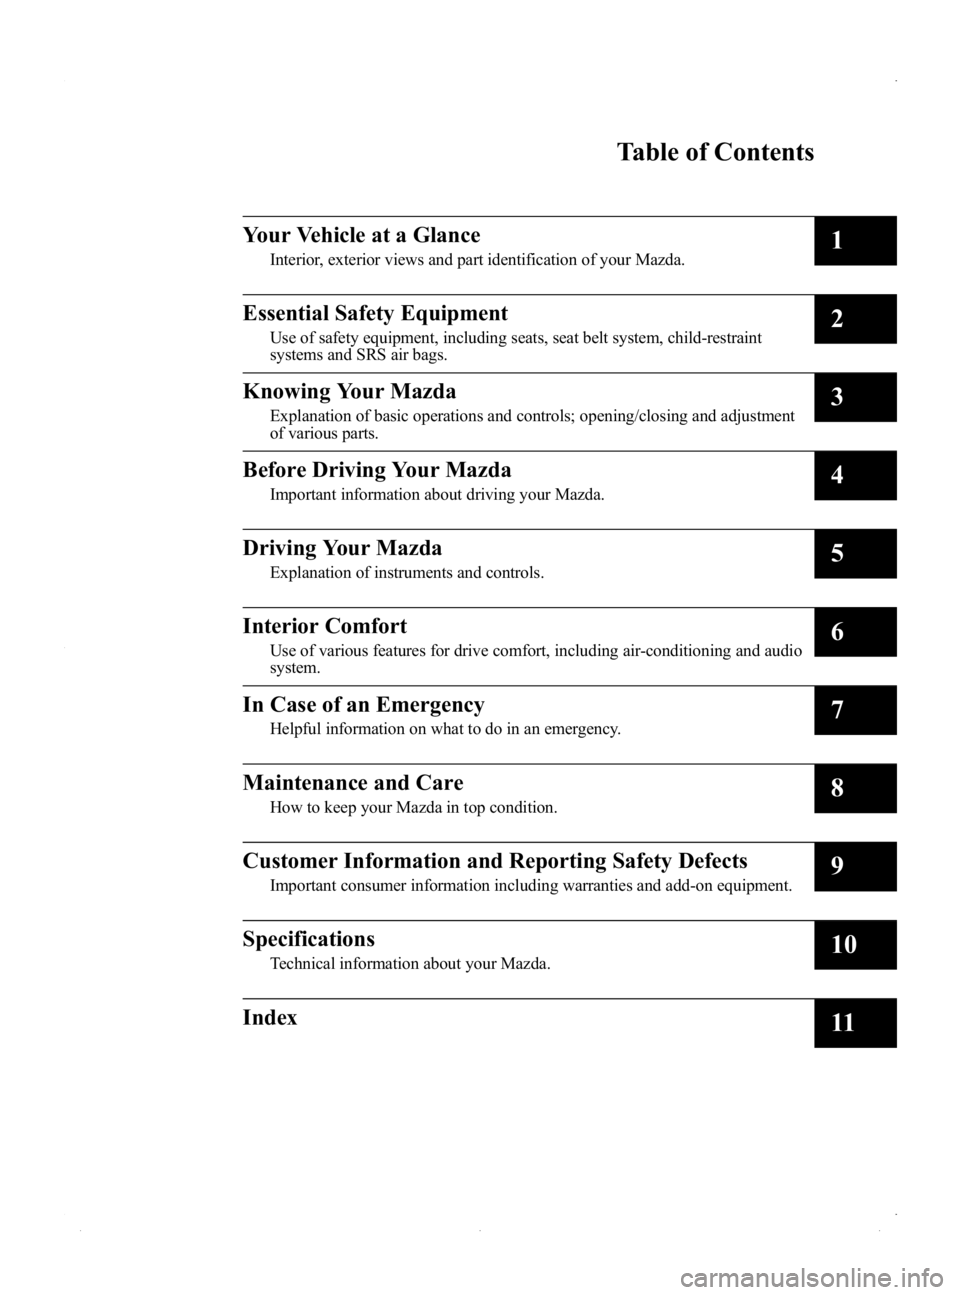 MAZDA MODEL MX-5 MIATA 2015  Owners Manual Black plate (5,1)
MX-5_8EN7-EA-14E_Edition3 Page5
Friday, September 5 2014 3:19 PM
Form No.8EN7-EA-14E
Table of Contents
Your Vehicle at a Glance
Interior, exterior views and part identification of yo